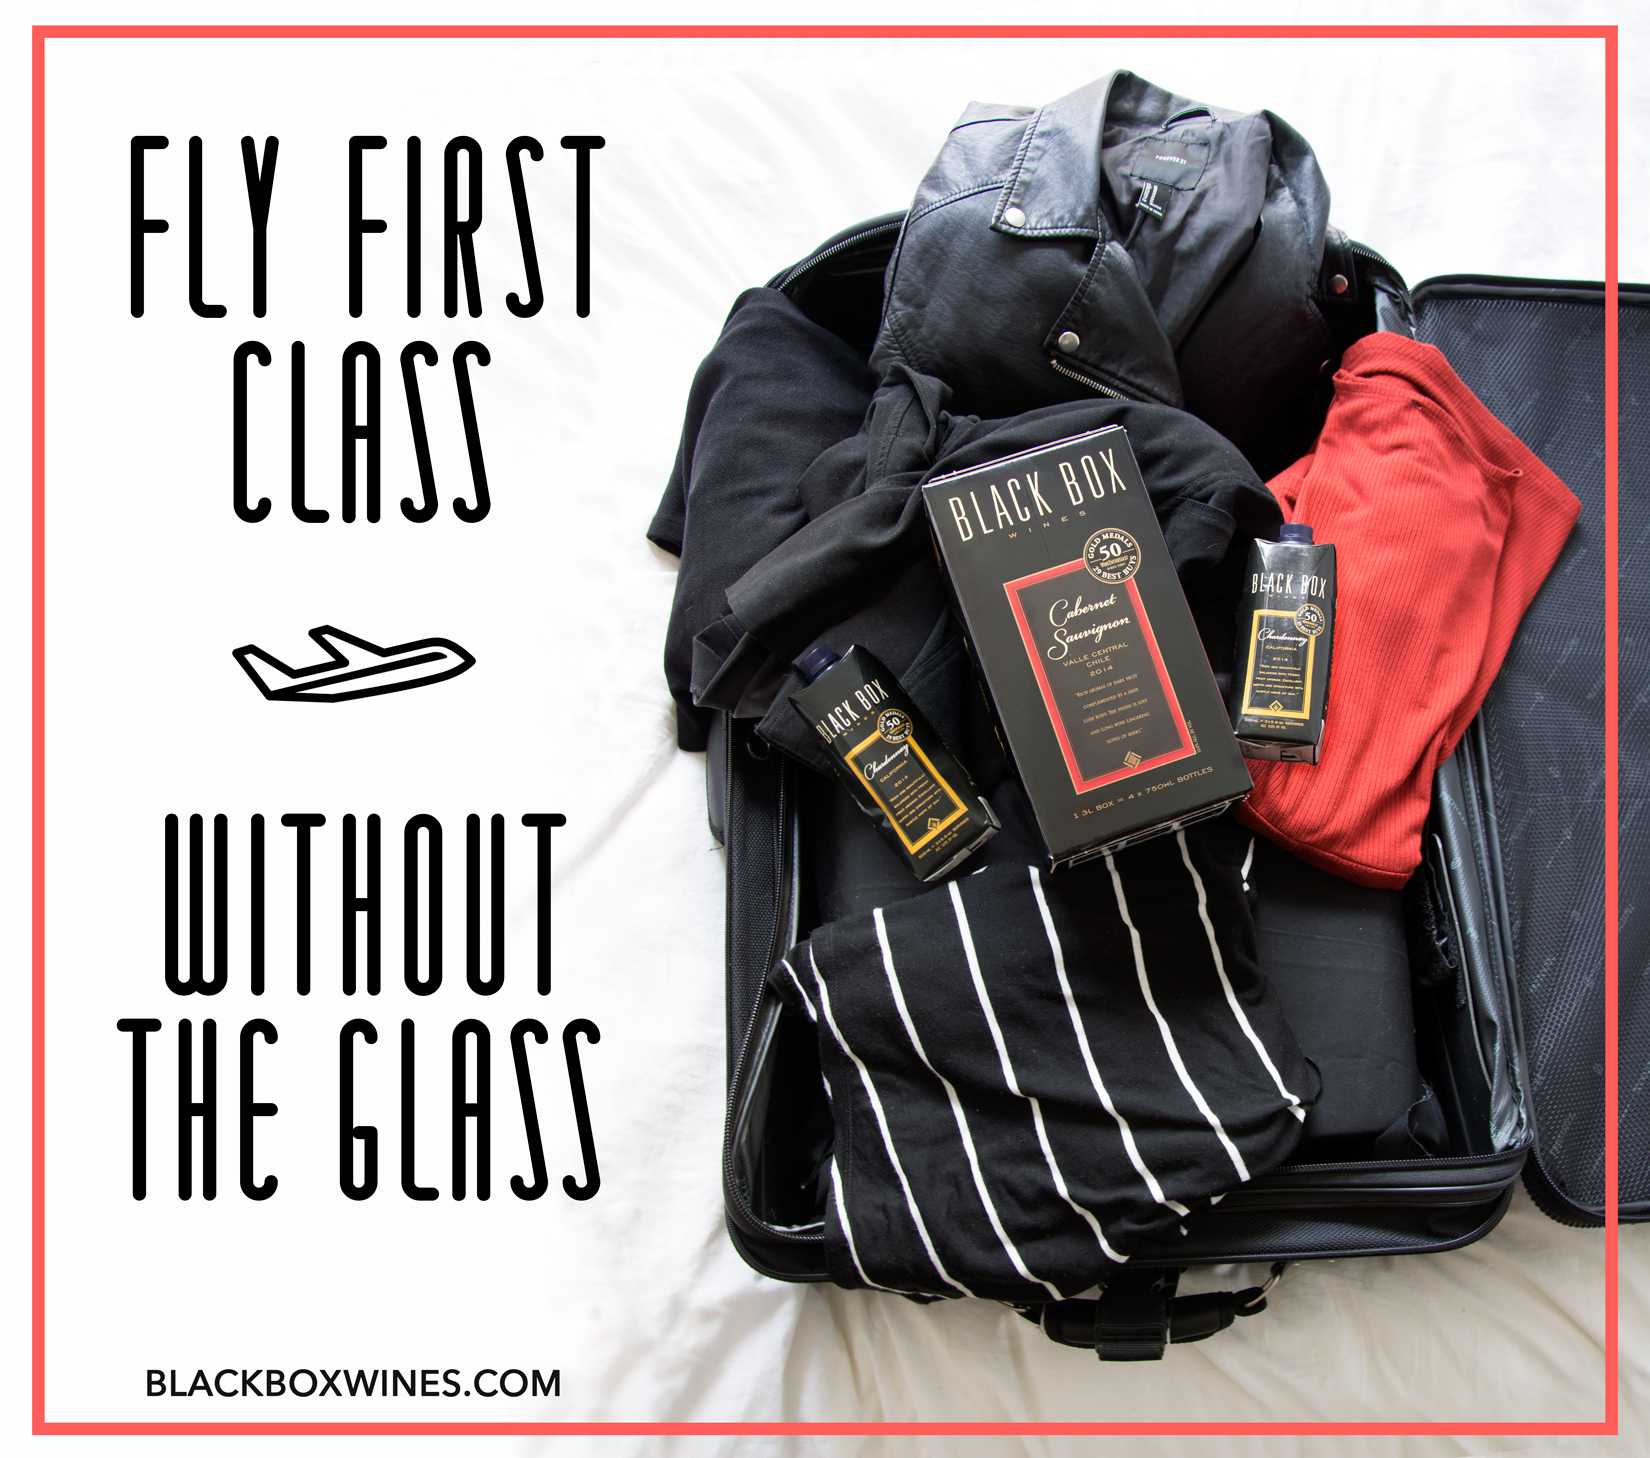 First Class, No Glass Ad 2